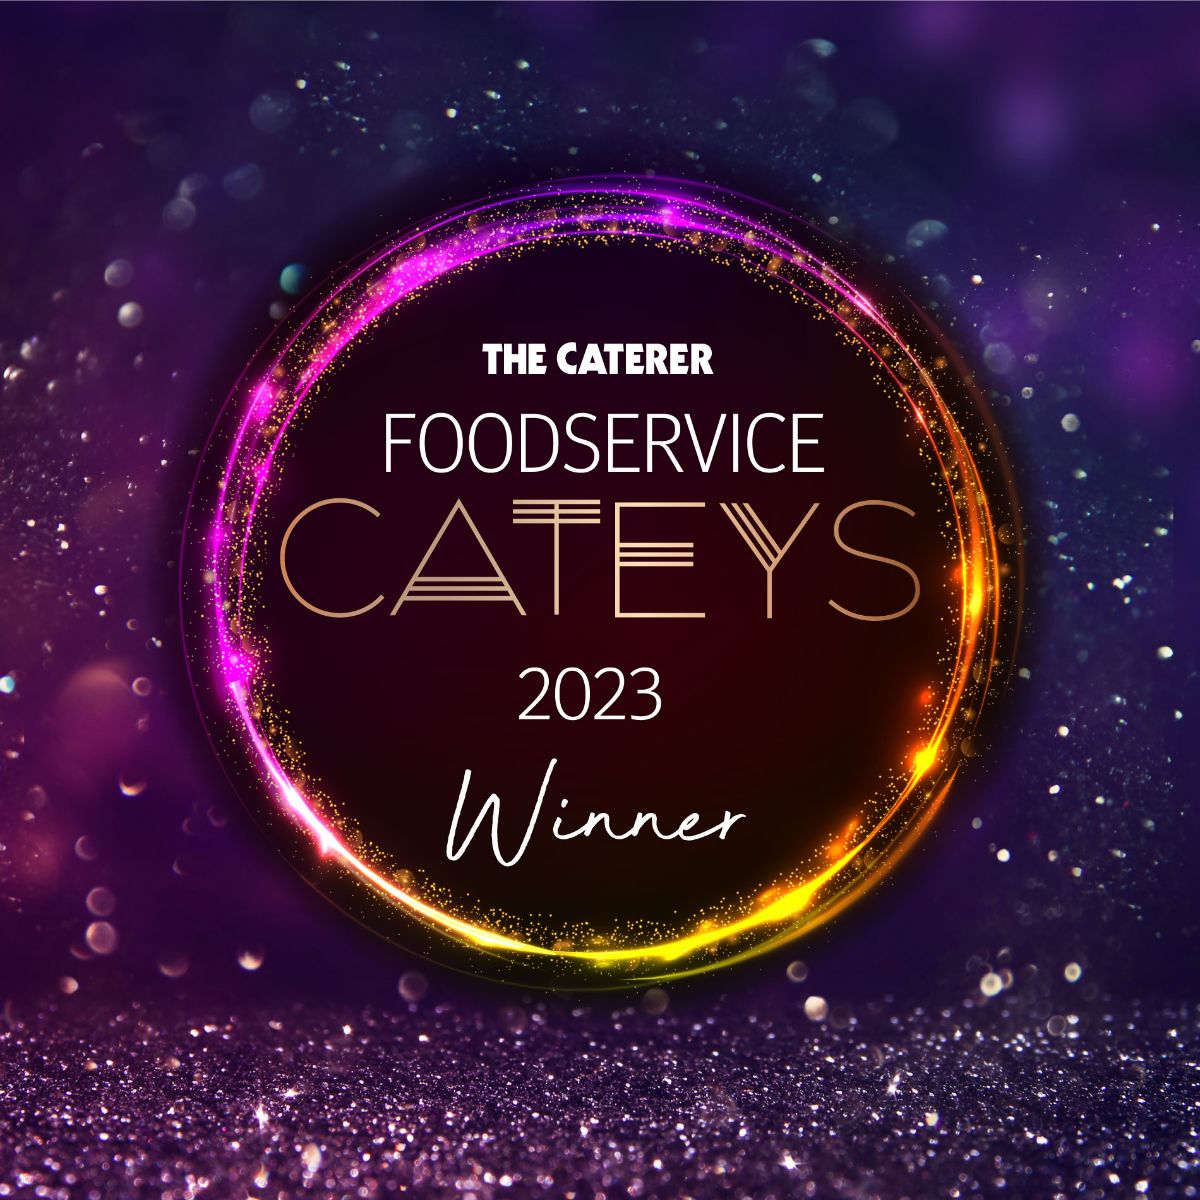 Winner of Event Caterer of the Year and Boutique Caterer of the Year at the Foodservice Cateys 2023.